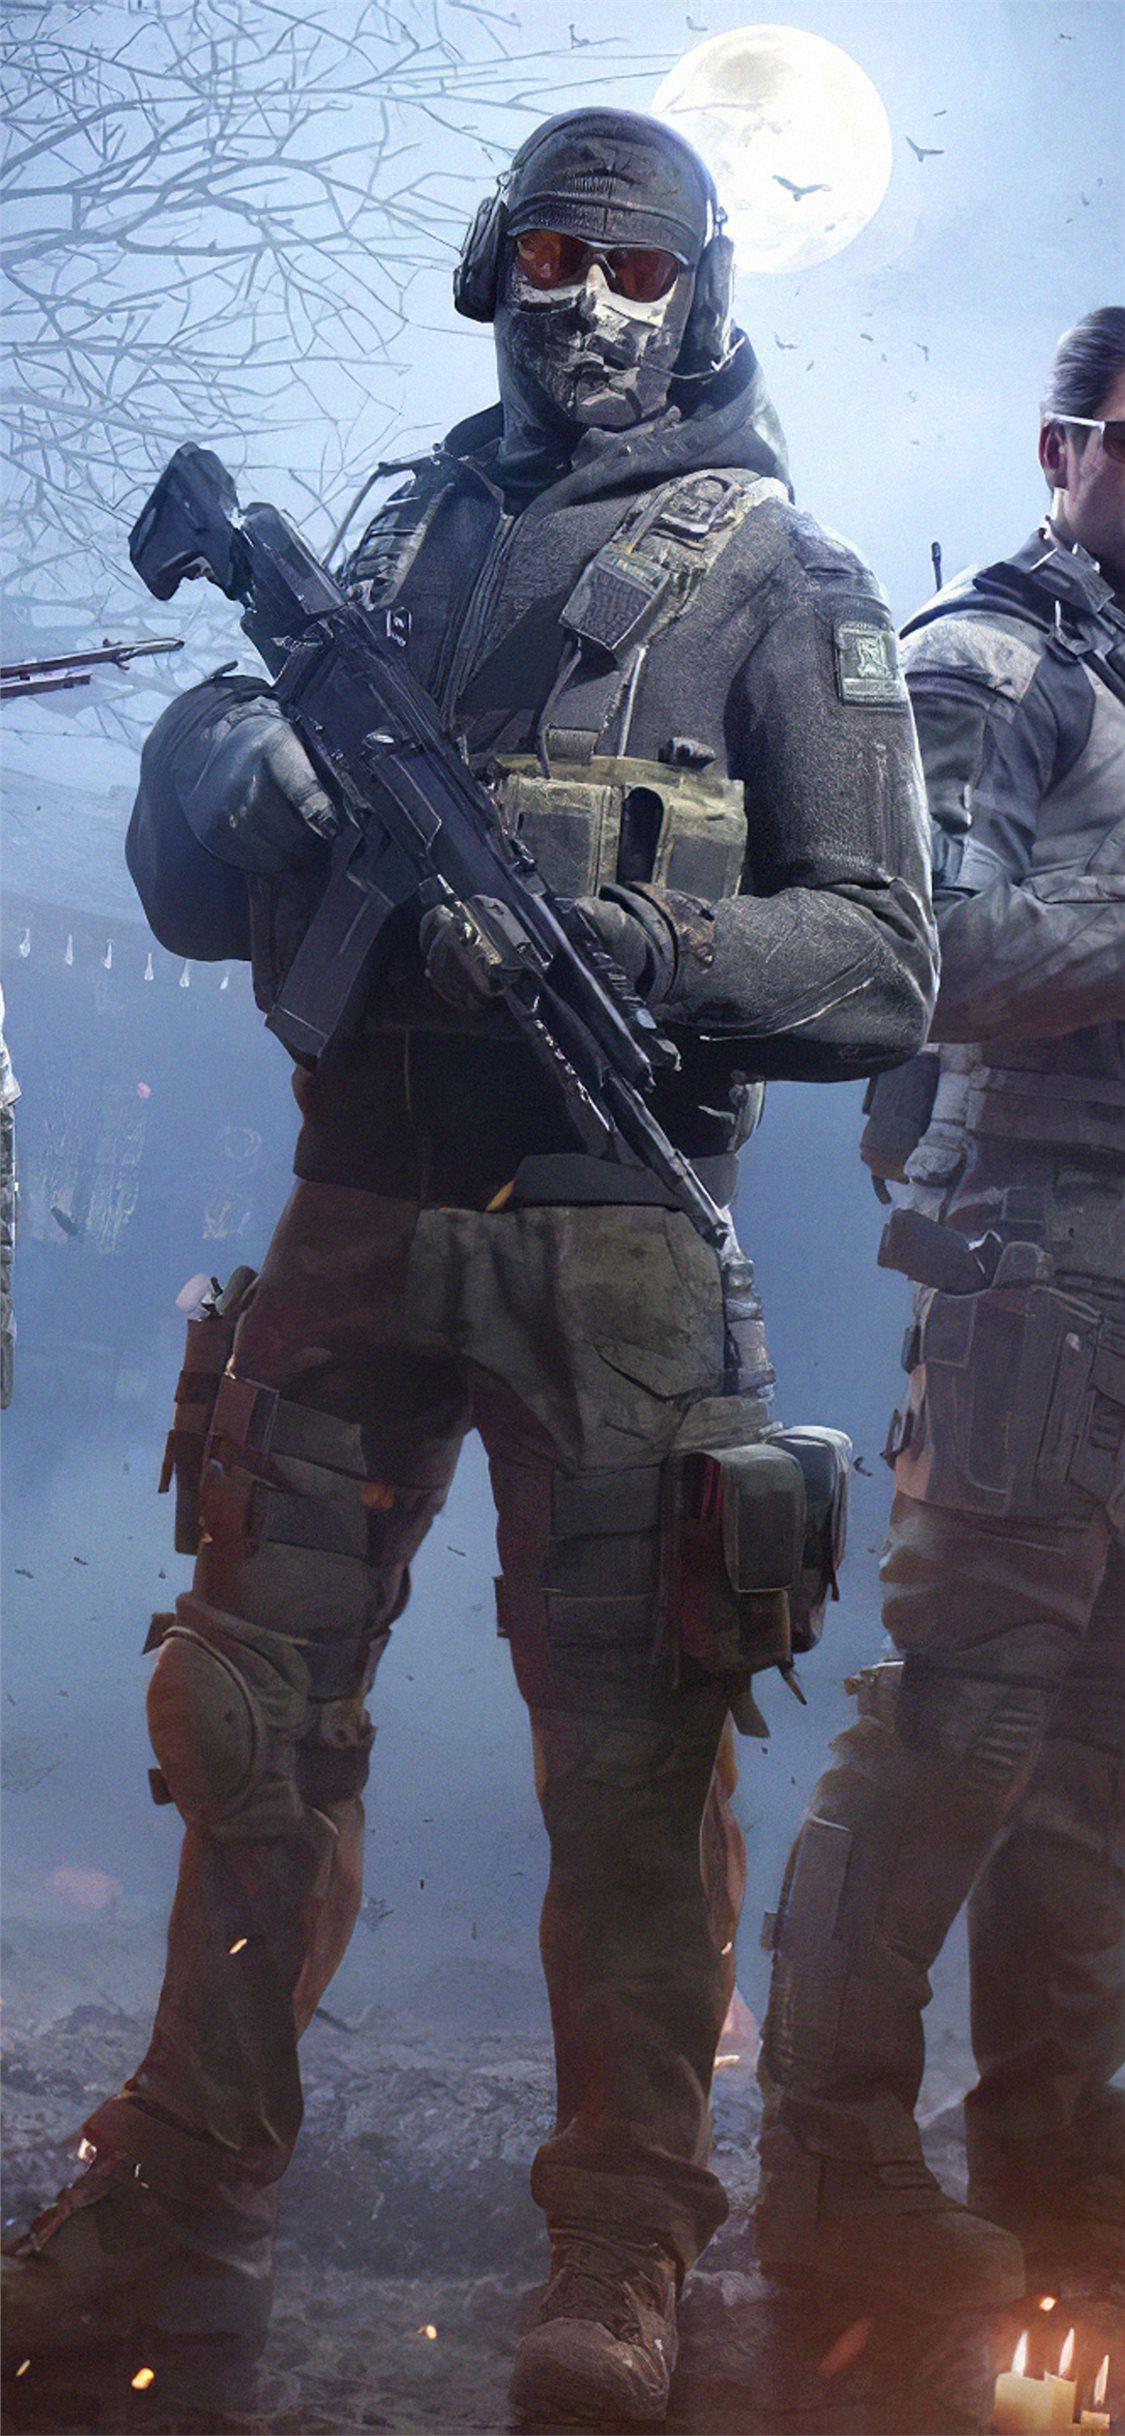 call of duty mobile 2019 game iPhone X Wallpaper Free Download